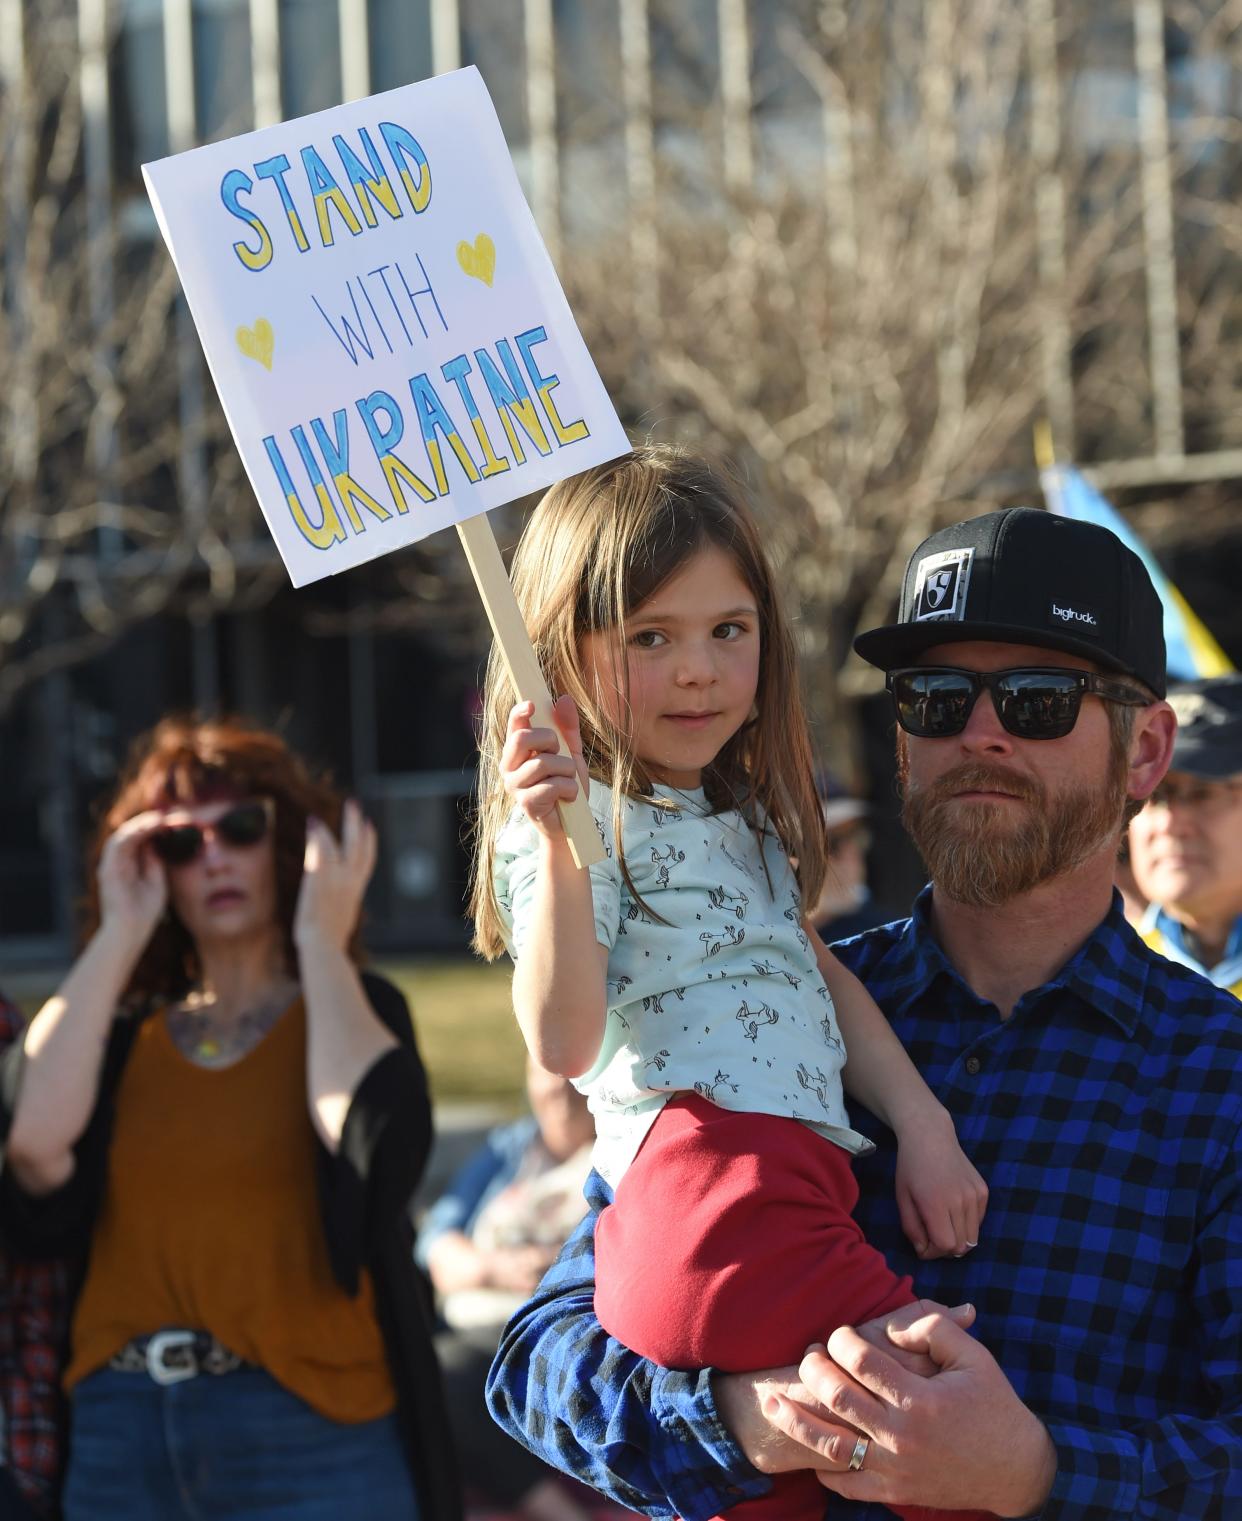 Adam Janecka holds his daughter, Ivena, 7, as they show their support at the "Stand with Ukraine" solidarity event on Tuesday, March 1, 2022, at City Plaza in downtown Reno.